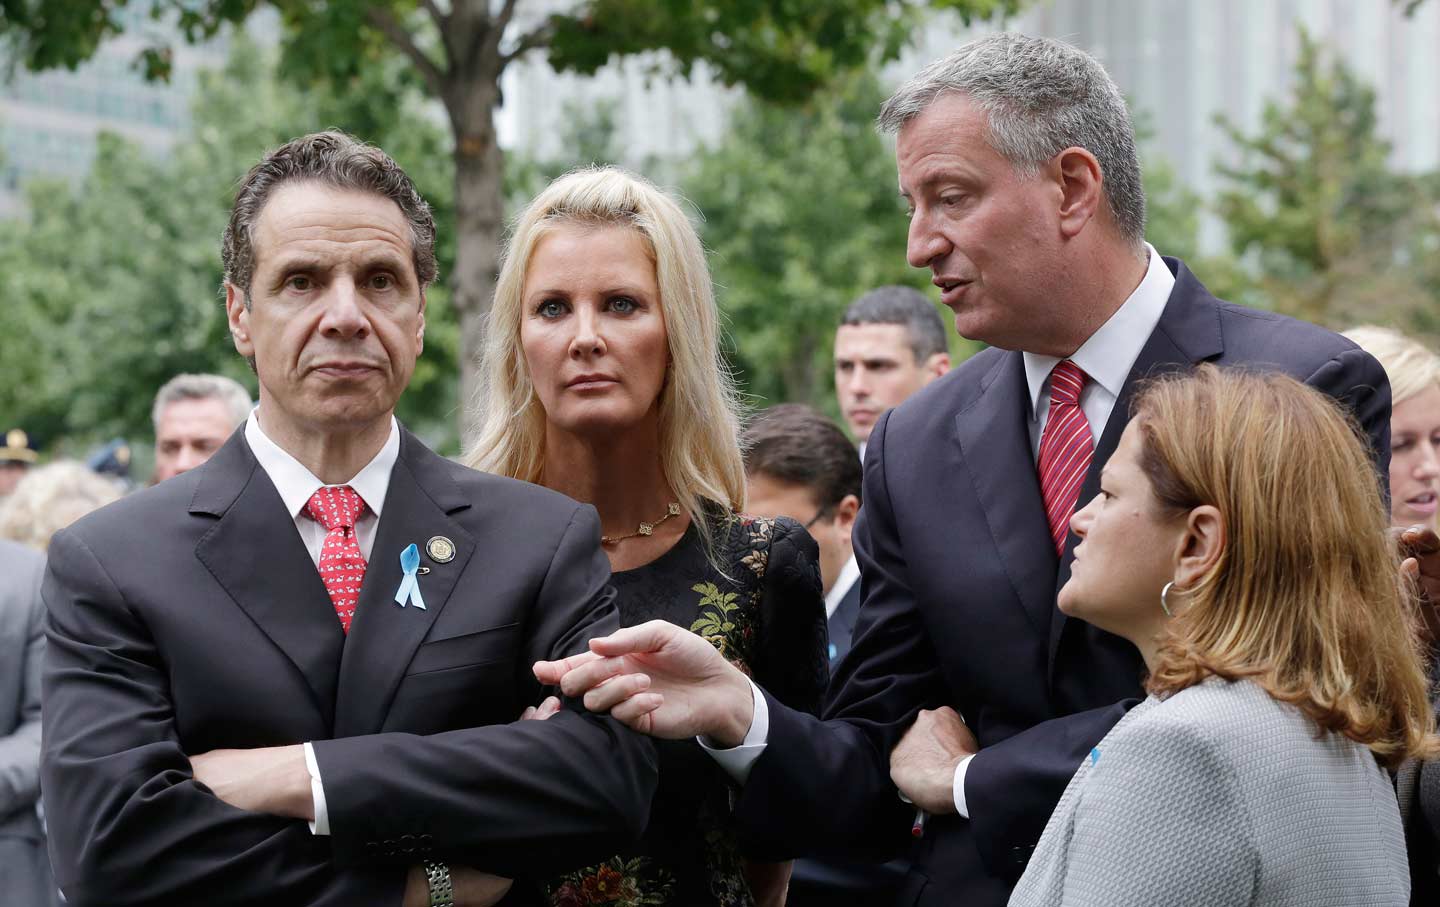 Cuomo looking angry, de Blasio trying to talk to him